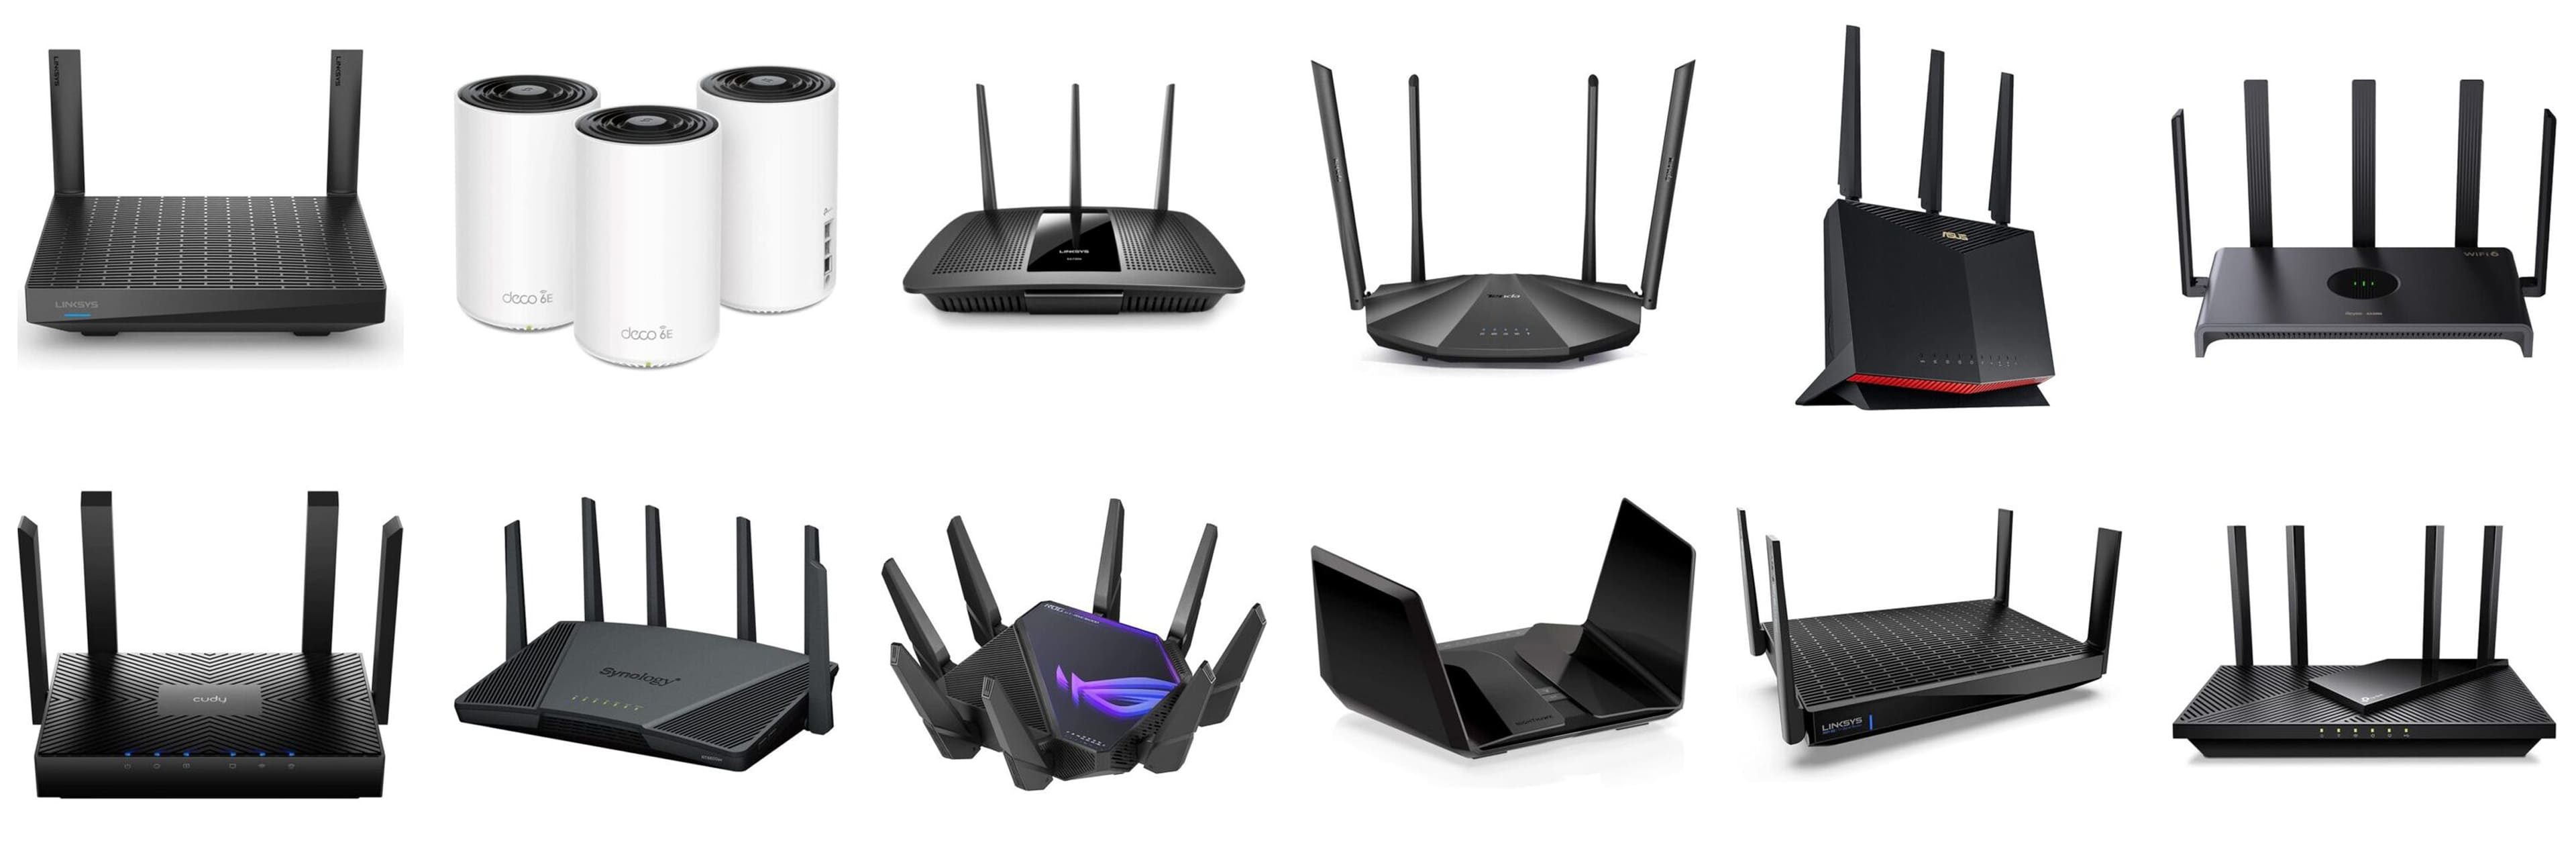  TP-Link AX3000 WiFi 6 Router (Archer AX55 Pro) - Multi Gigabit  Wireless Internet Router, 1 x 2.5 Gbps Port, Dual Band, VPN Router, OFDMA,  MU-MIMO, USB Port, WPA3, Compatible with Alexa